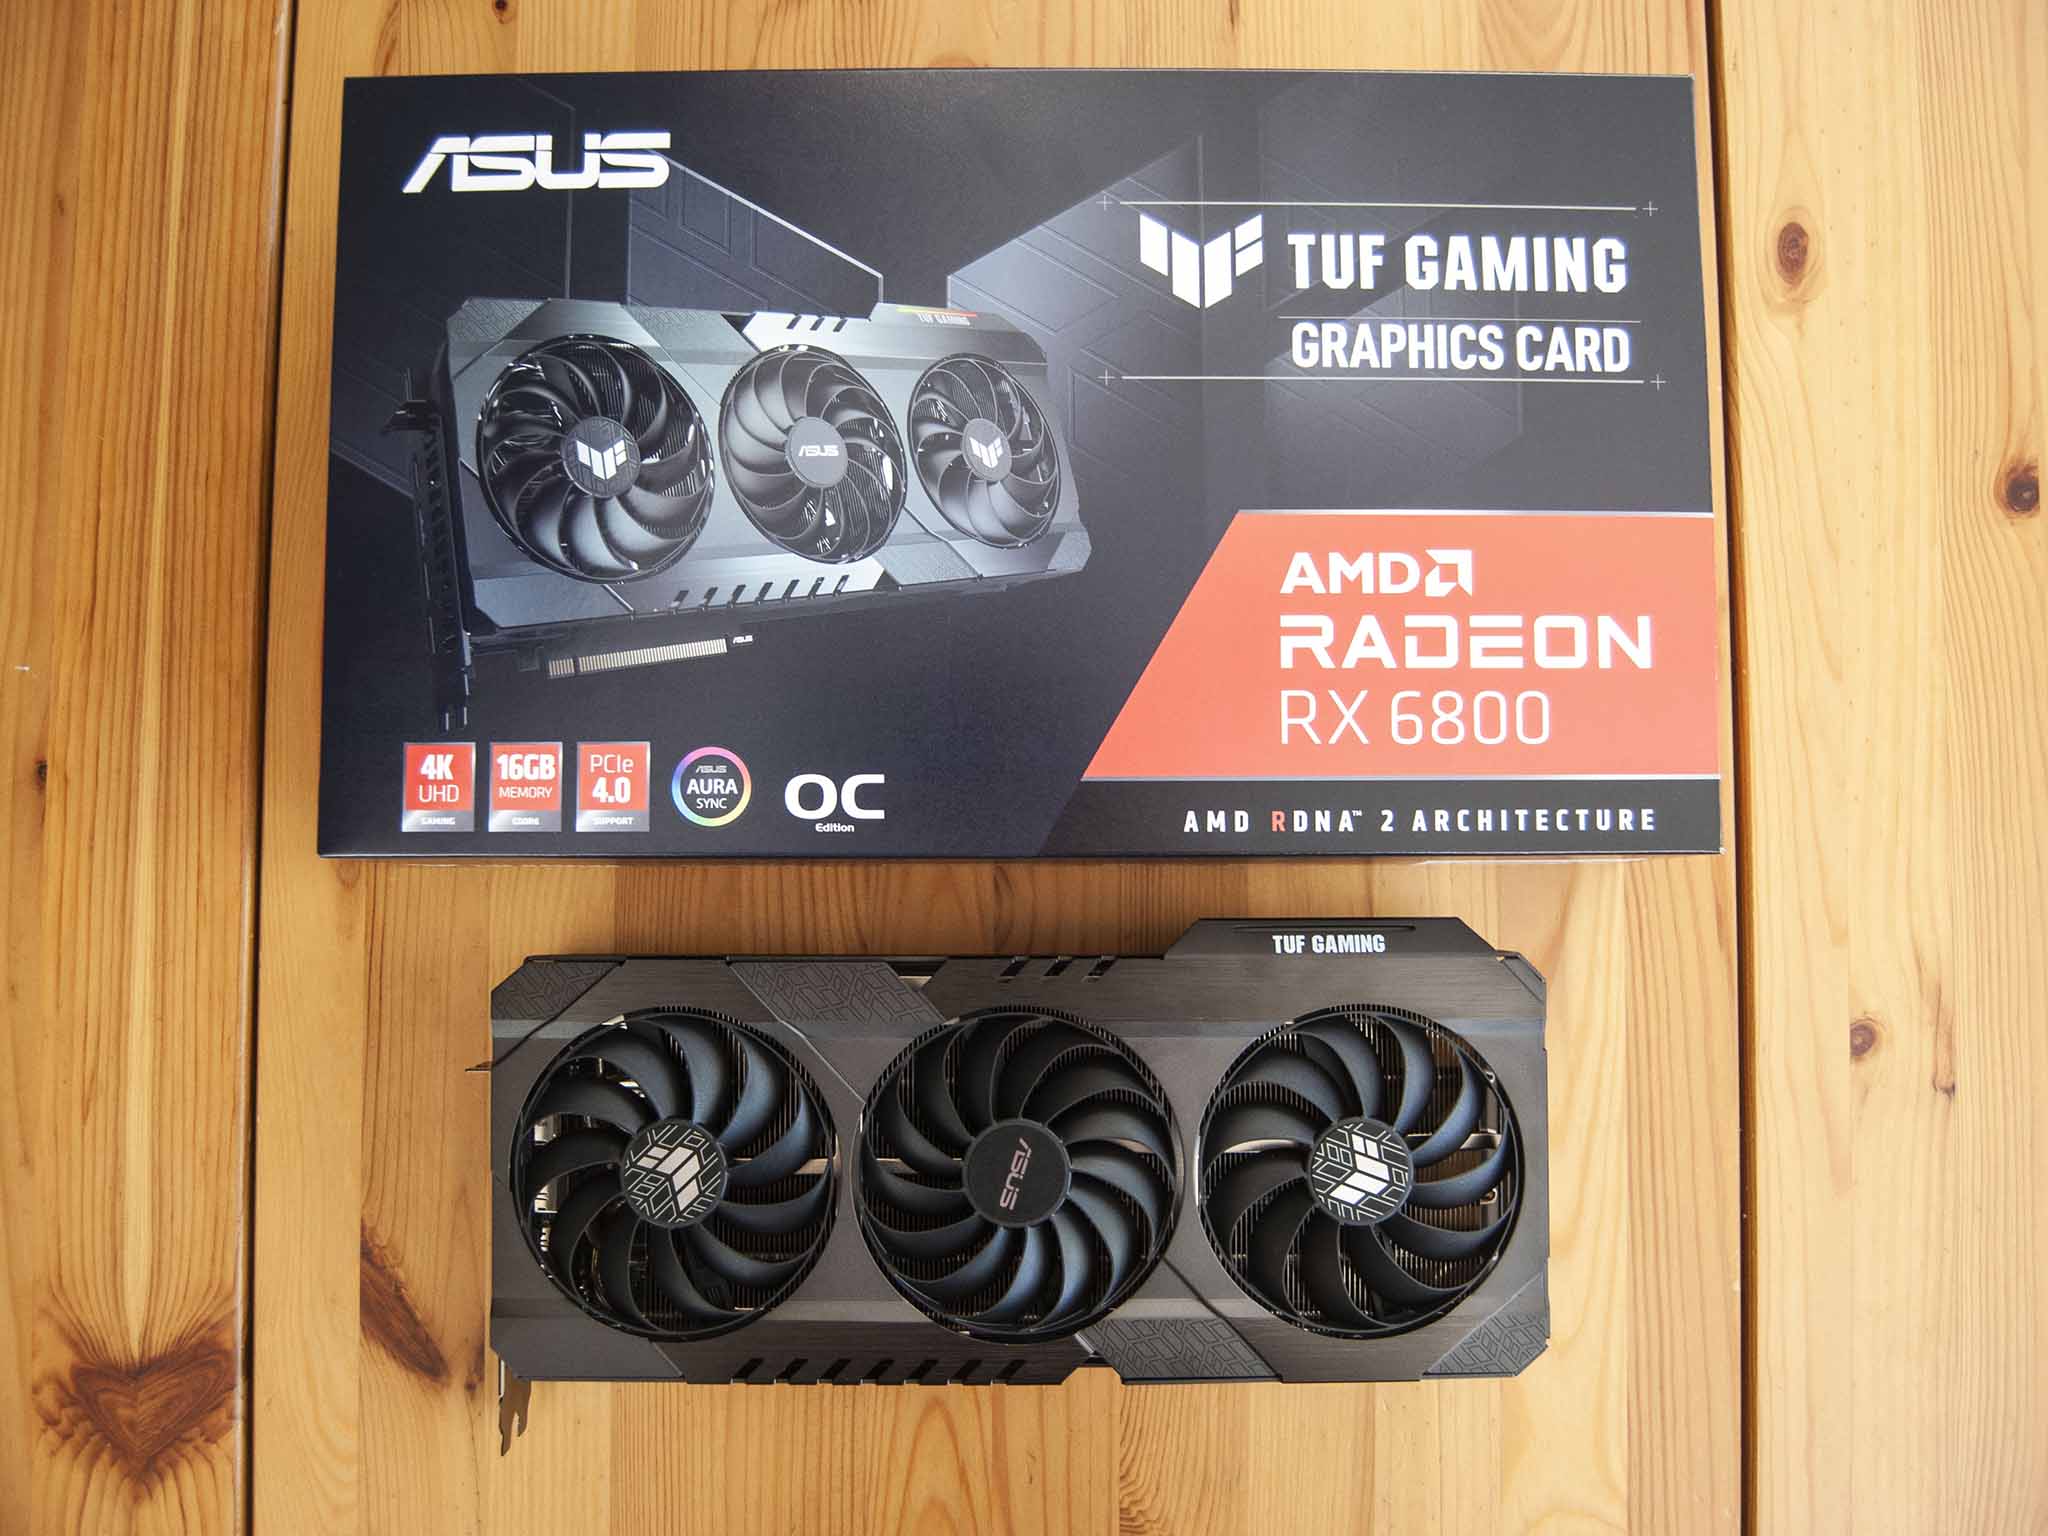 AMD RX 6800 and 6800 XT review: Big Navi means AMD is finally